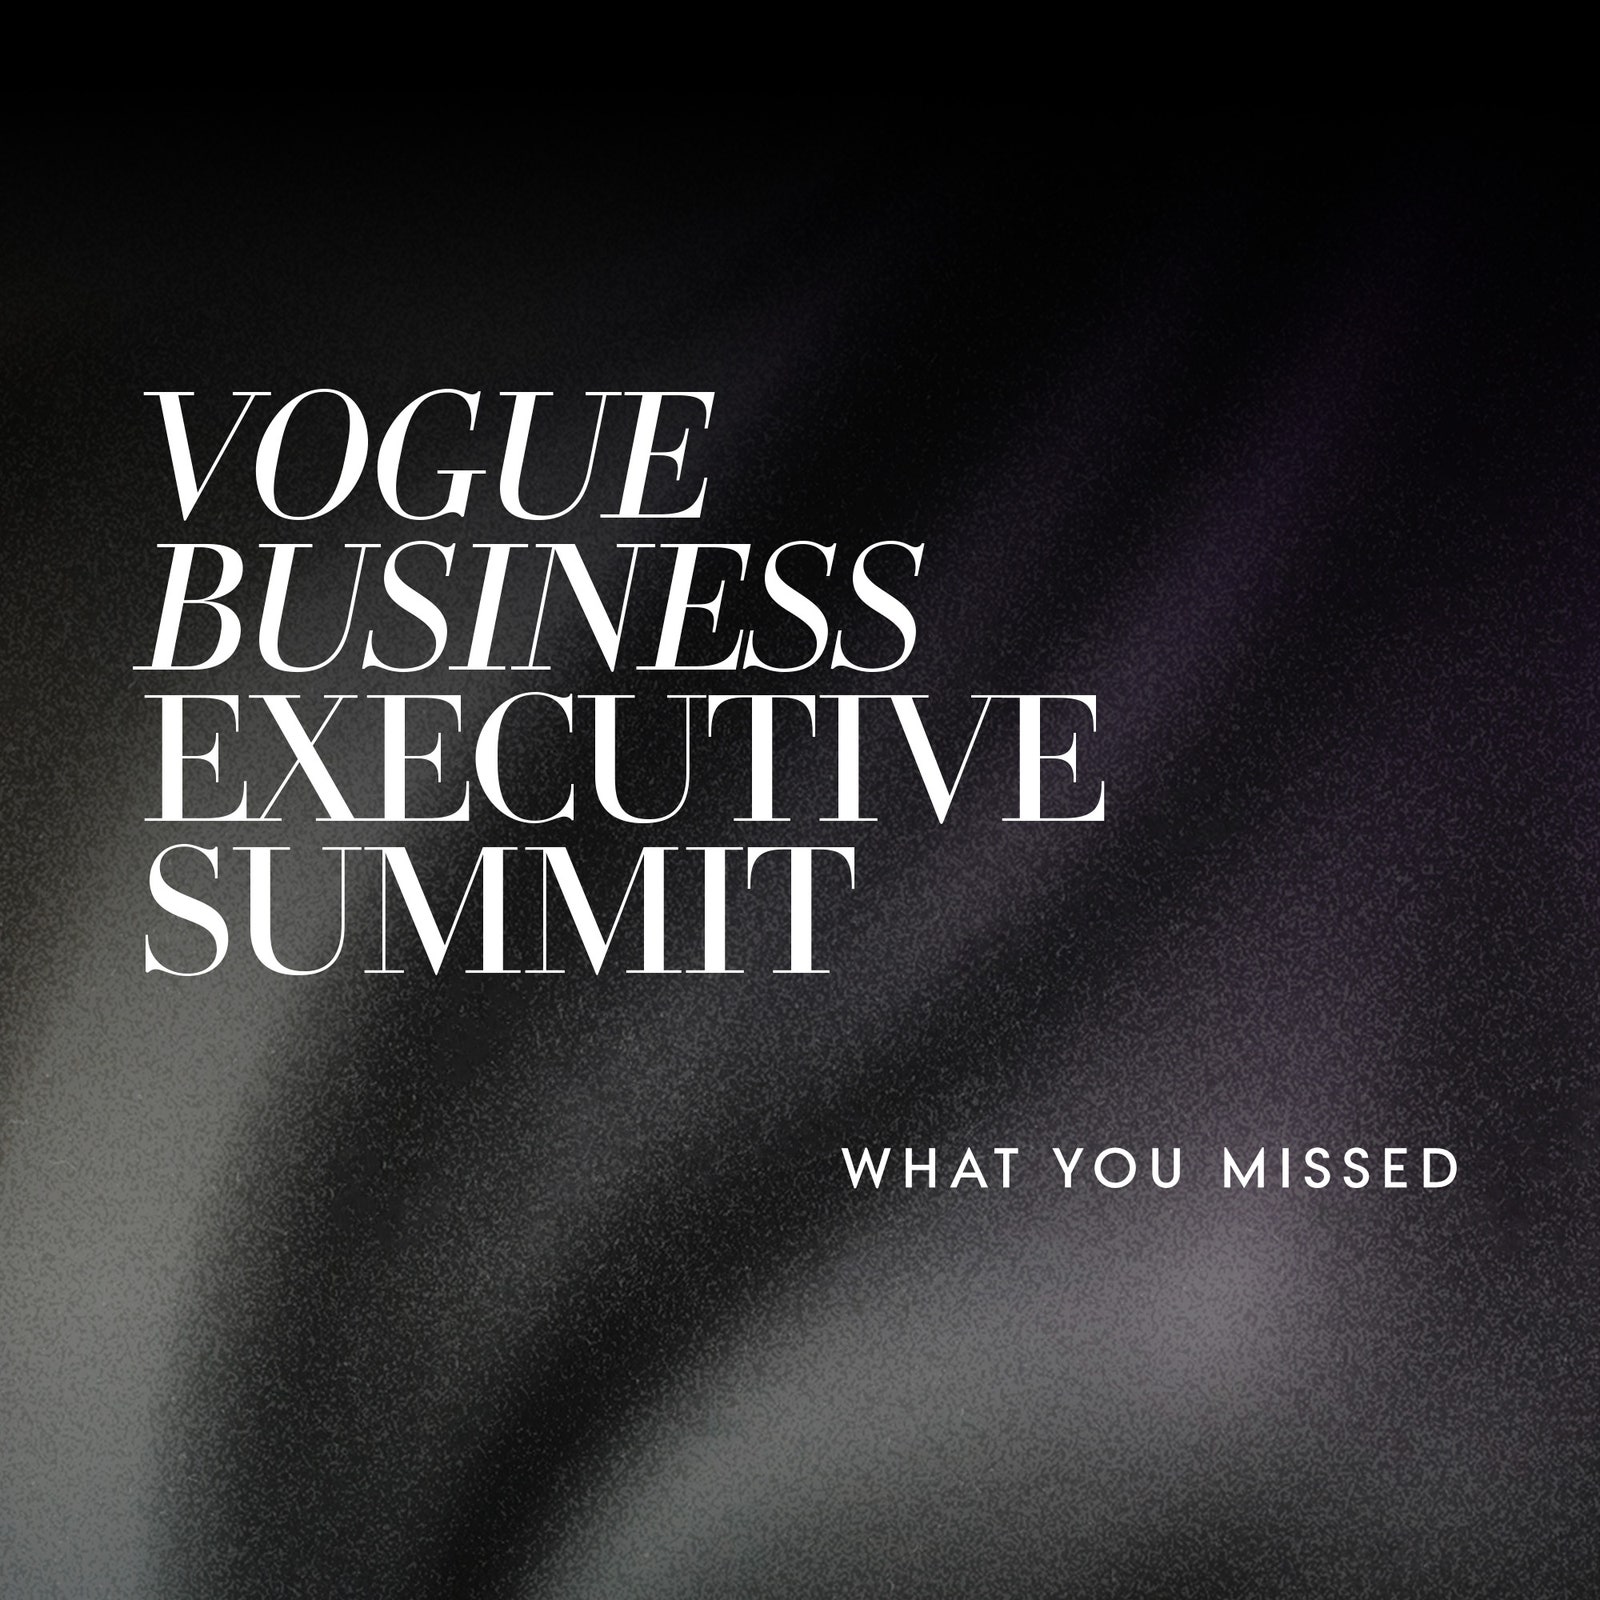 What you missed at the Vogue Business Executive Summit